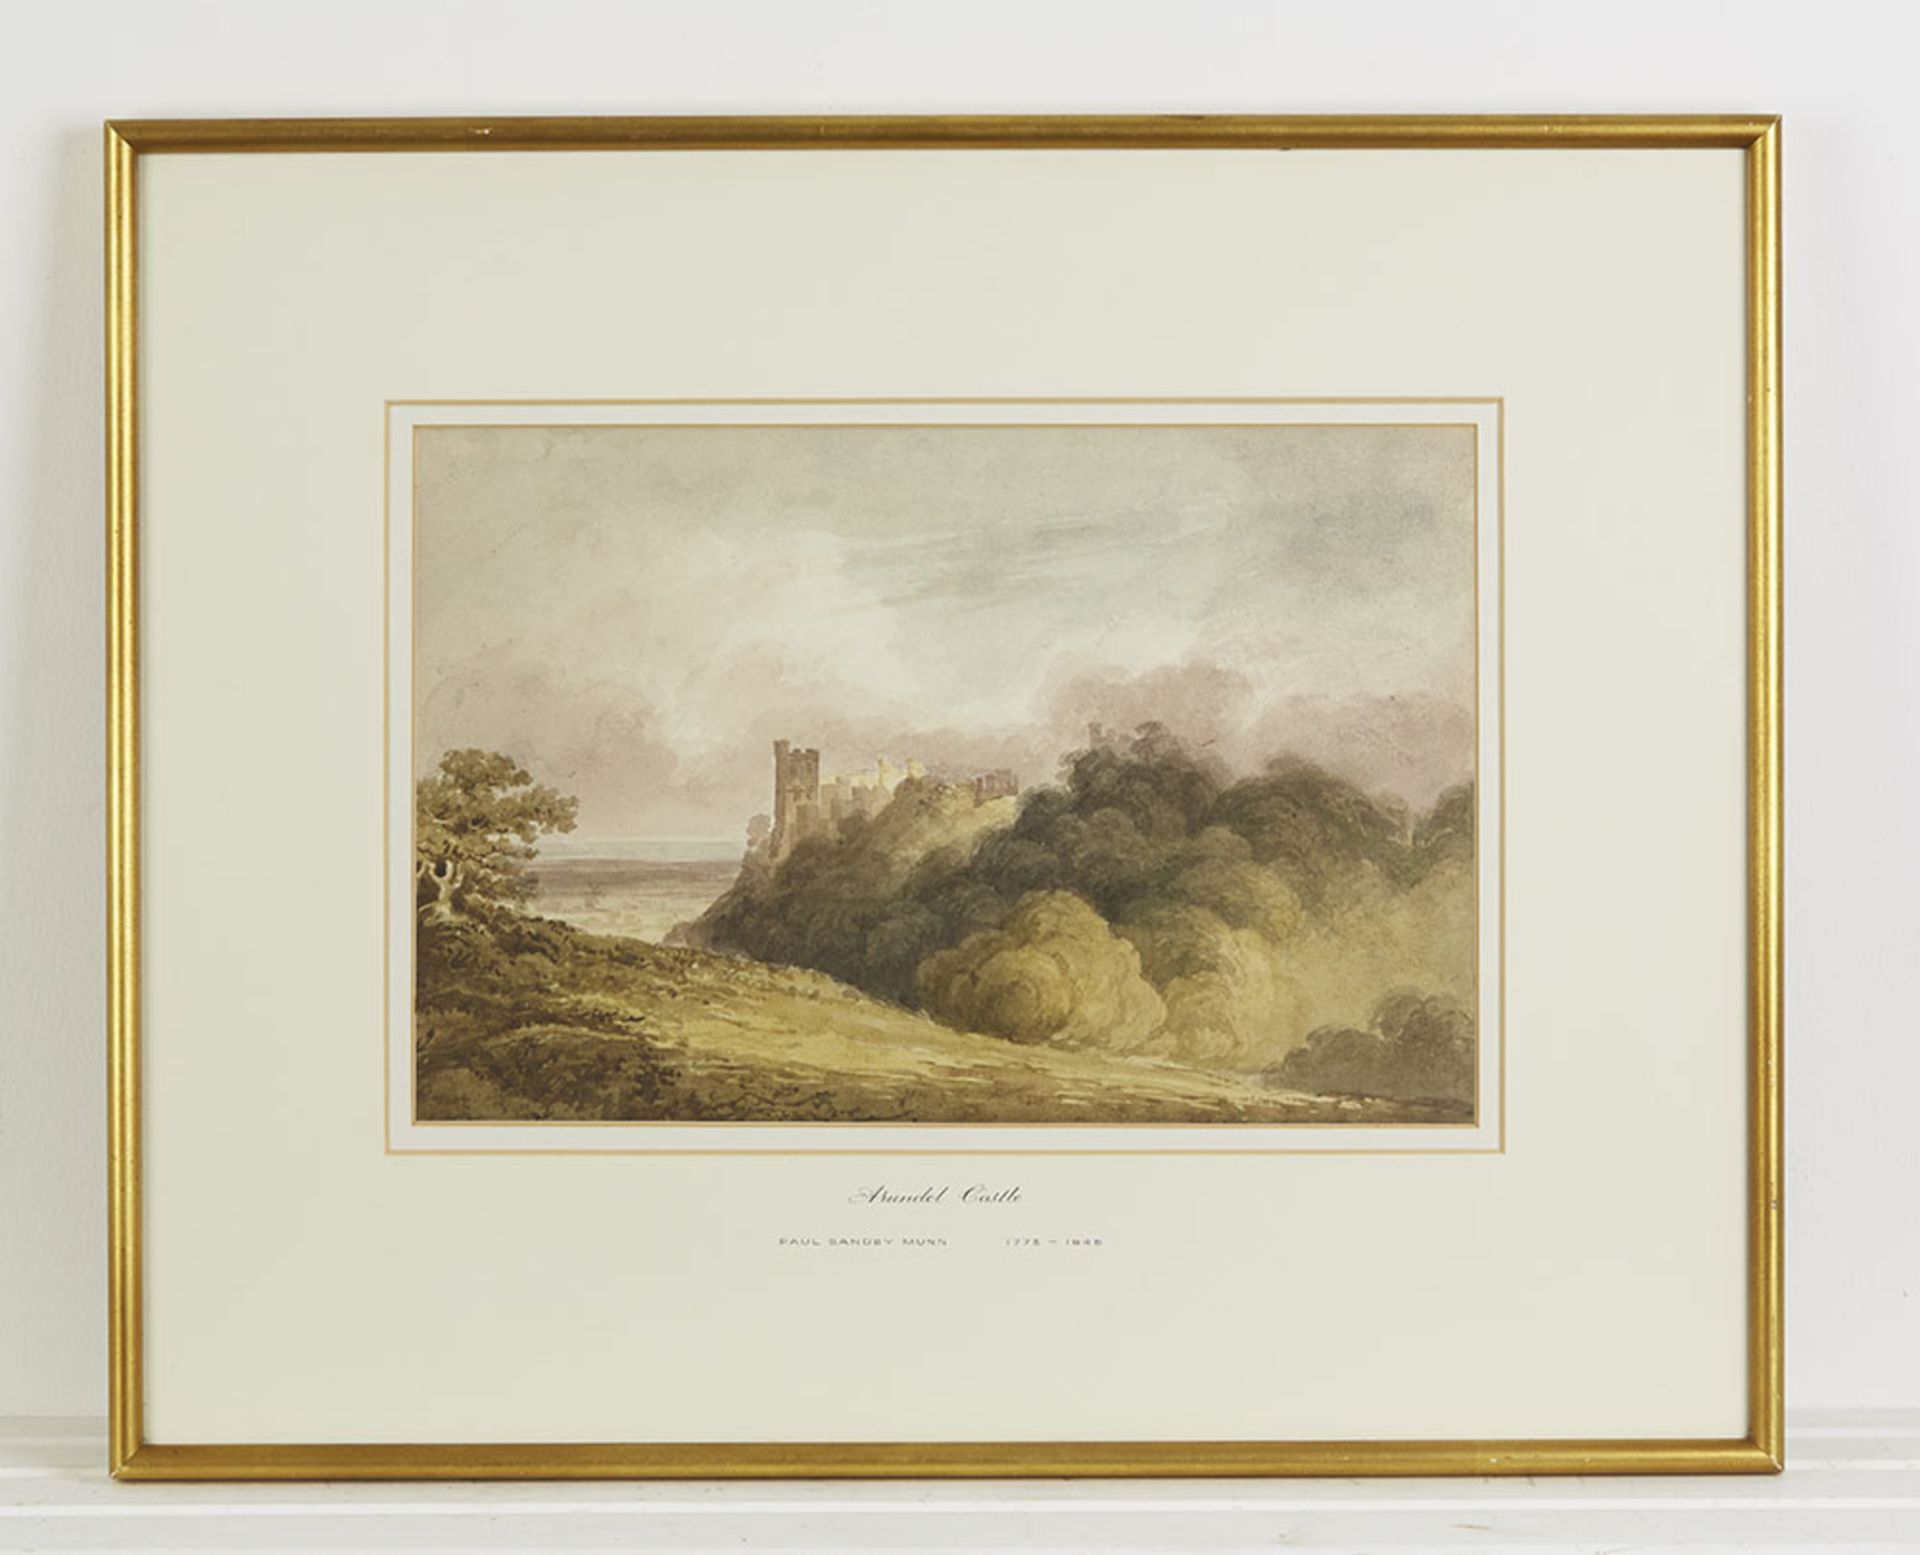 Original Watercolour Painting Arundel Castle By Paul Sandby Munn 1773-1845 - FREE UK DELIVERY